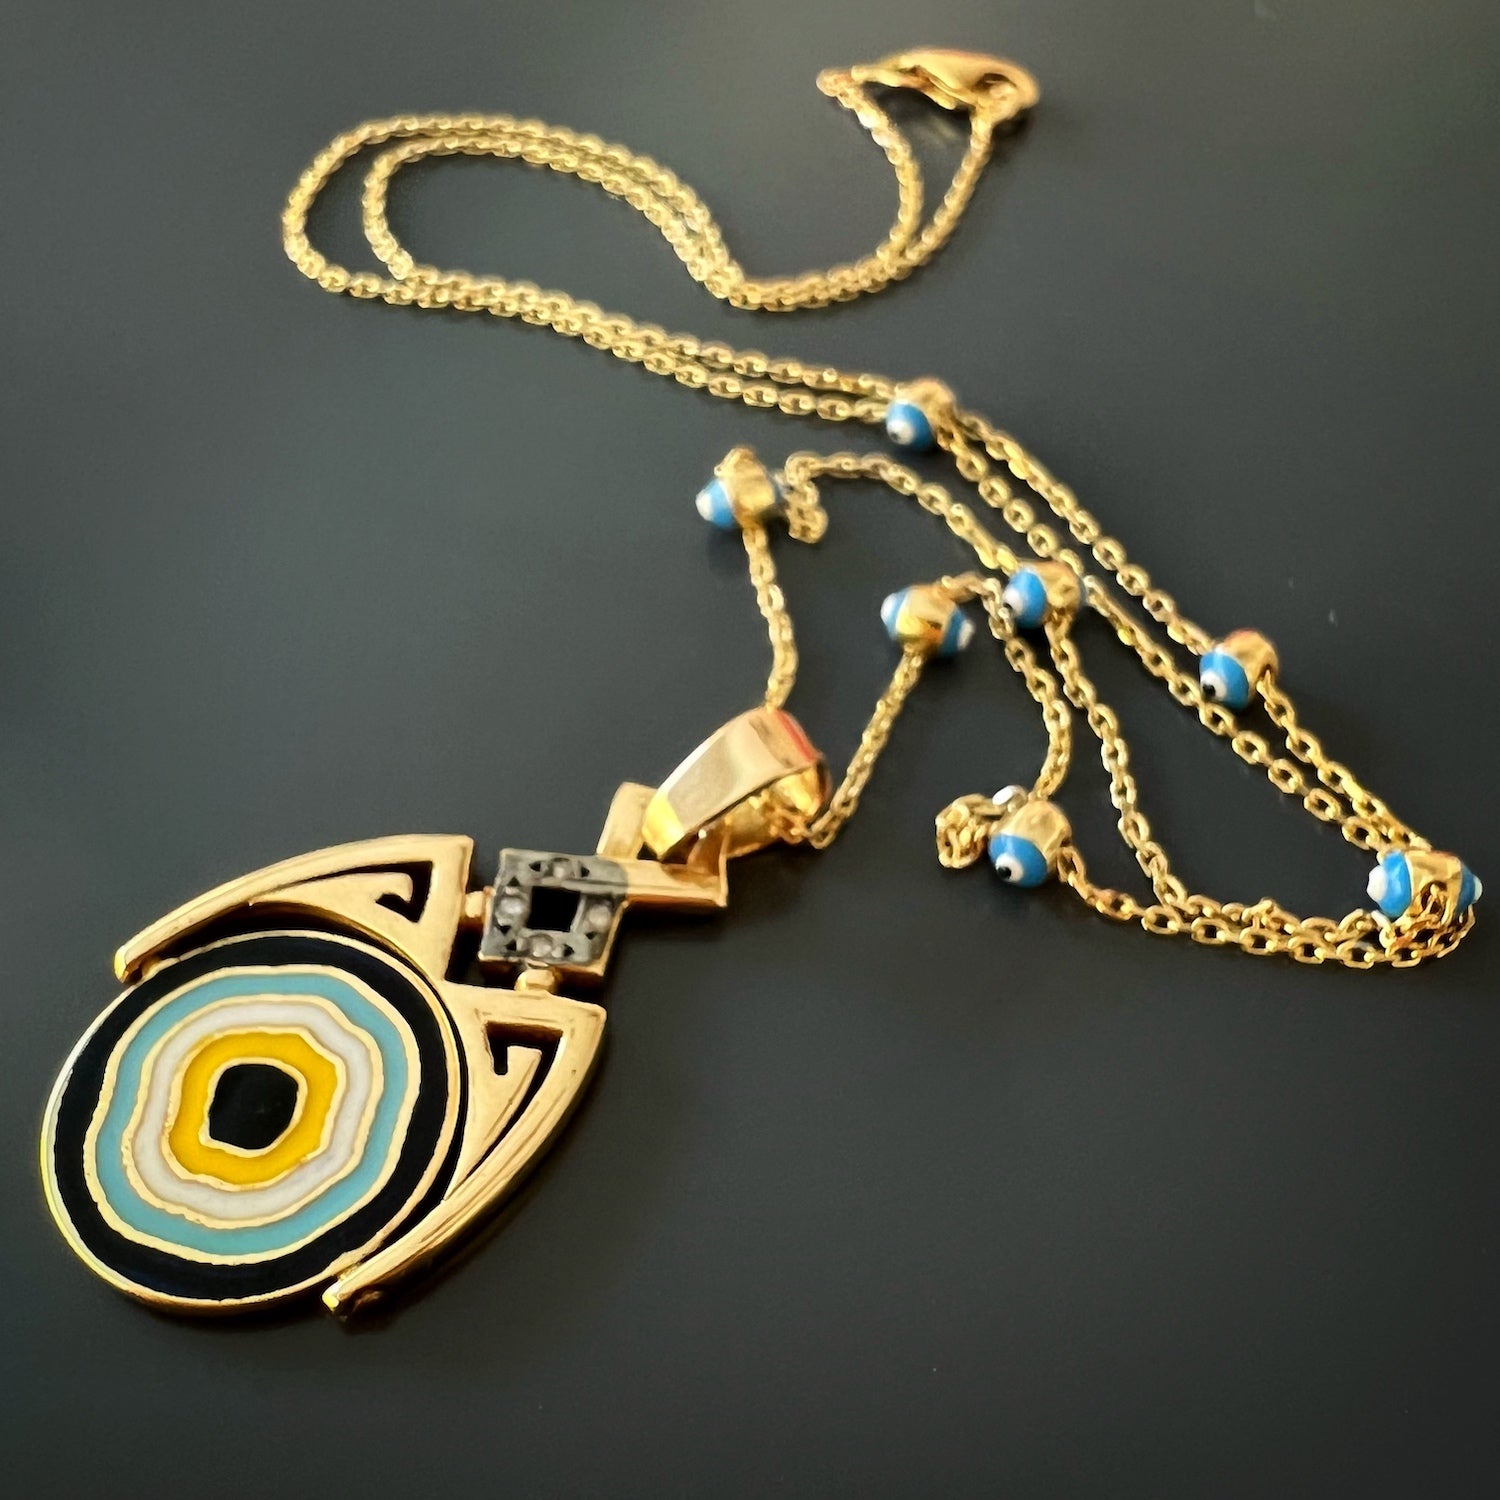 Gold and Diamond Lucky Evil Eye Necklace - A captivating necklace handcrafted from 14k yellow gold, adorned with a flip pendant featuring diamonds and intricate blue and yellow enamel.